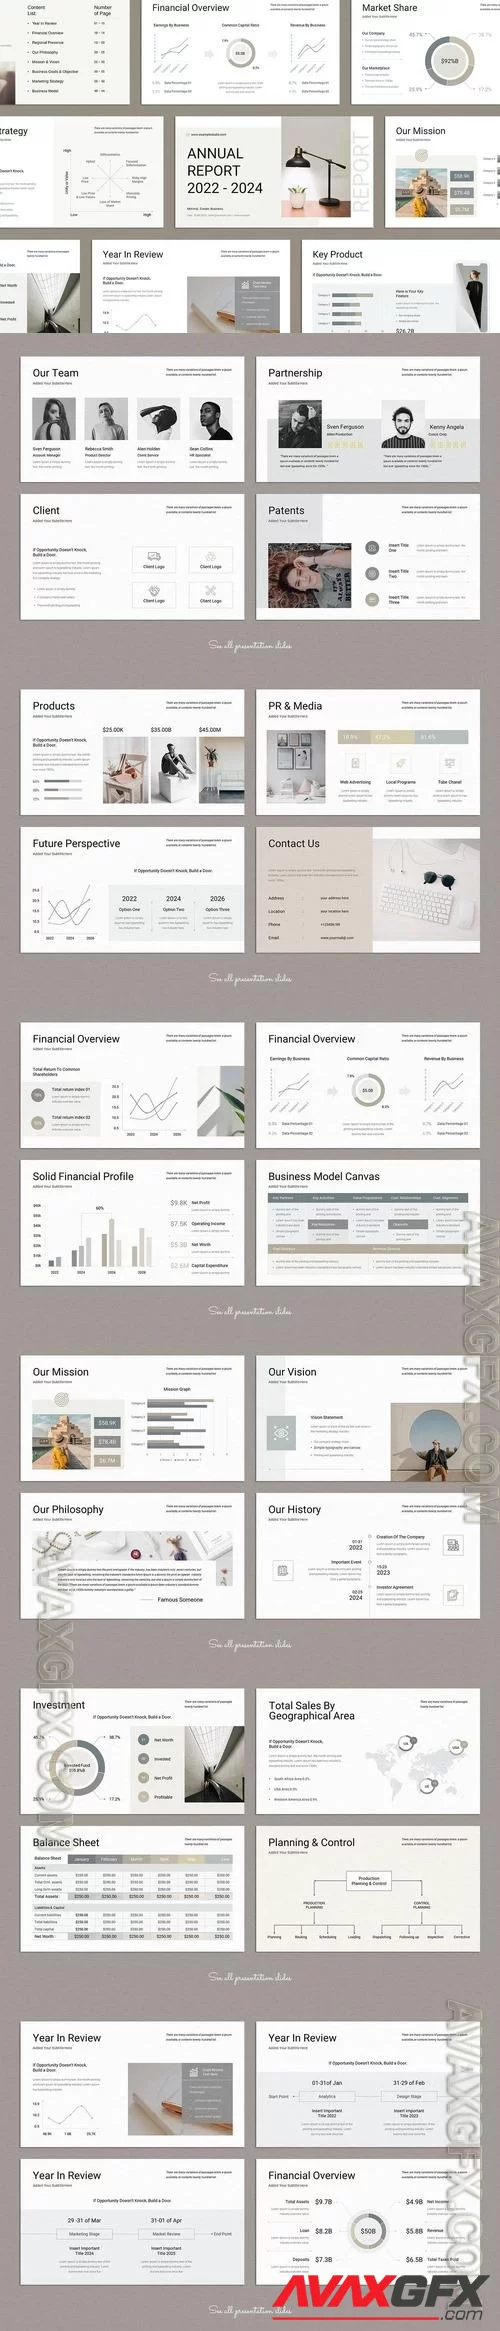 Annual Report PowerPoint Presentation Template FR3QX68 [PPTX]